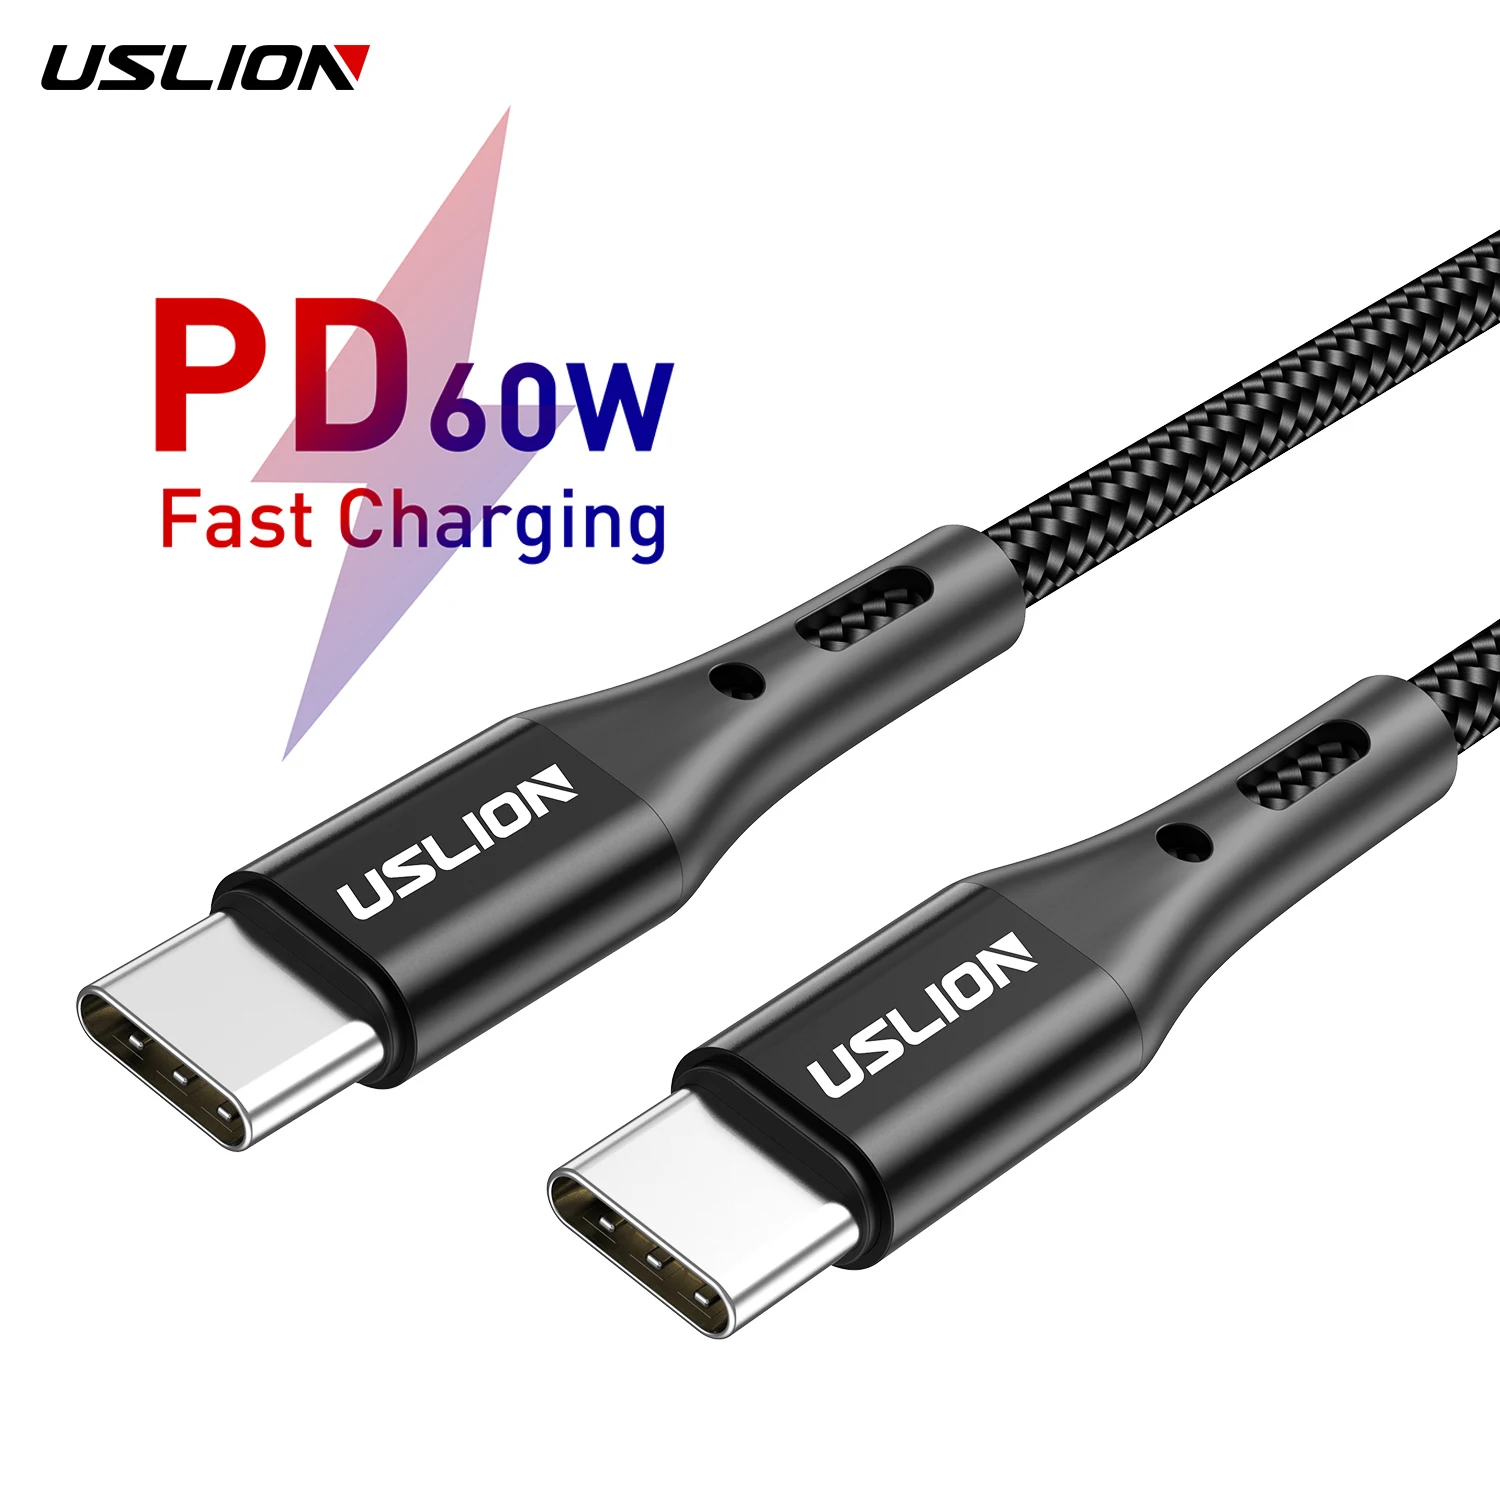 

USLION PD 60W Type C to Type C Cable Fast Charging QC 3.0 USB C Data Cord For Macbook Xiaomi 12 POCO X4 Samsung S22U Oneplus 9rt